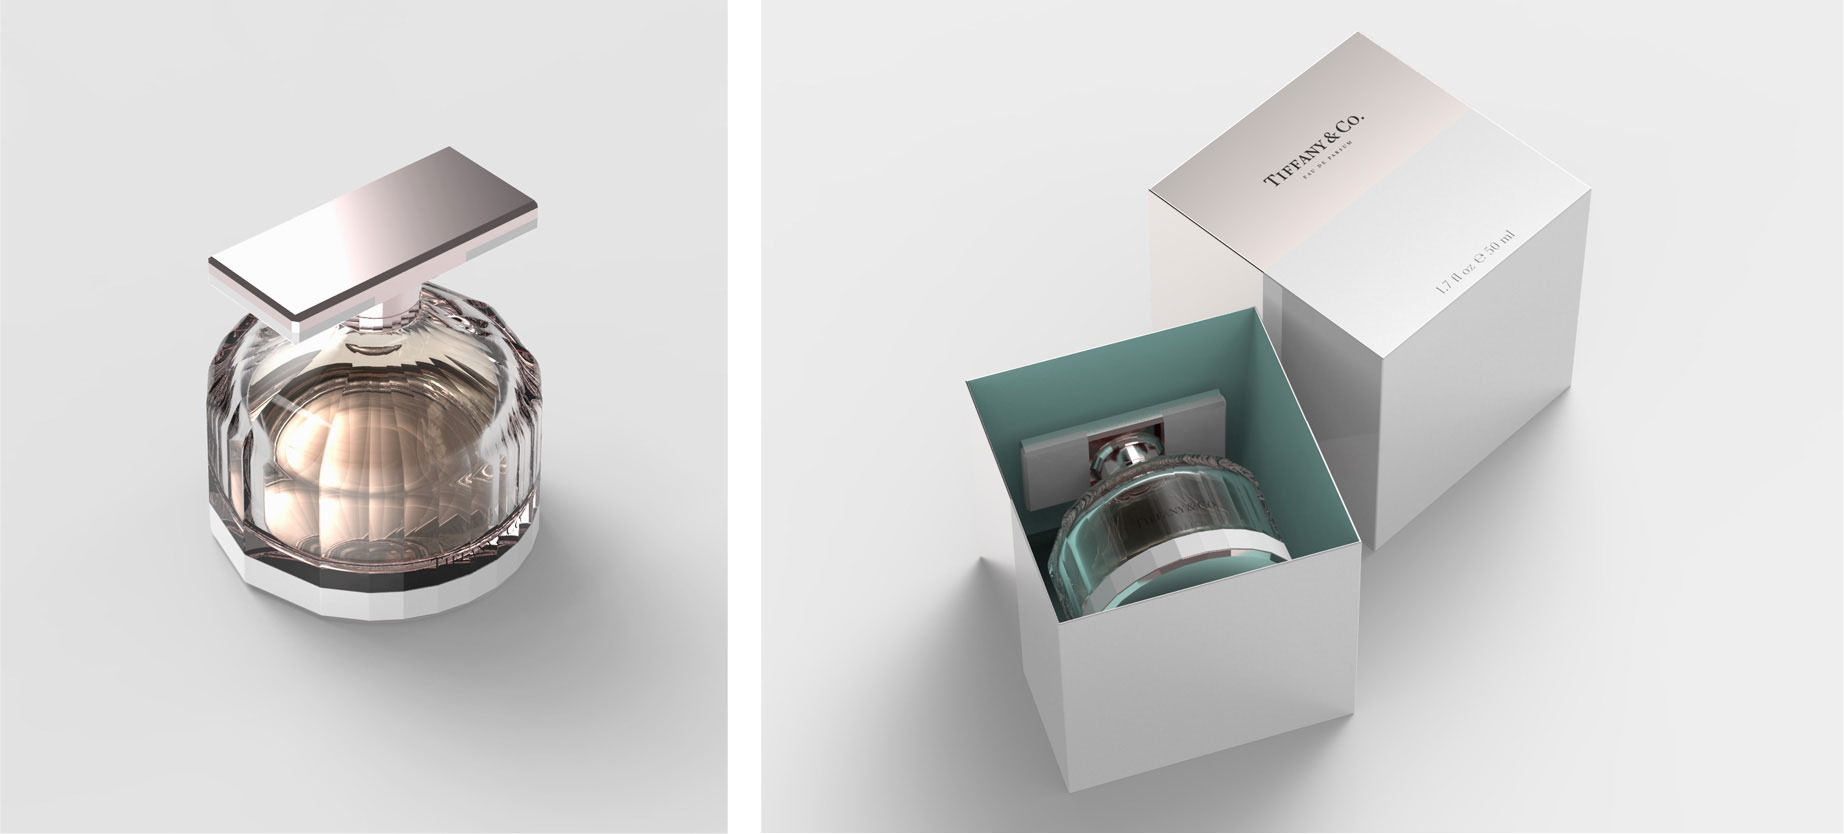 Tiffany and Co. Fragrance, Bottle Concept, Top Views and Packaging, Product and Packaging Design